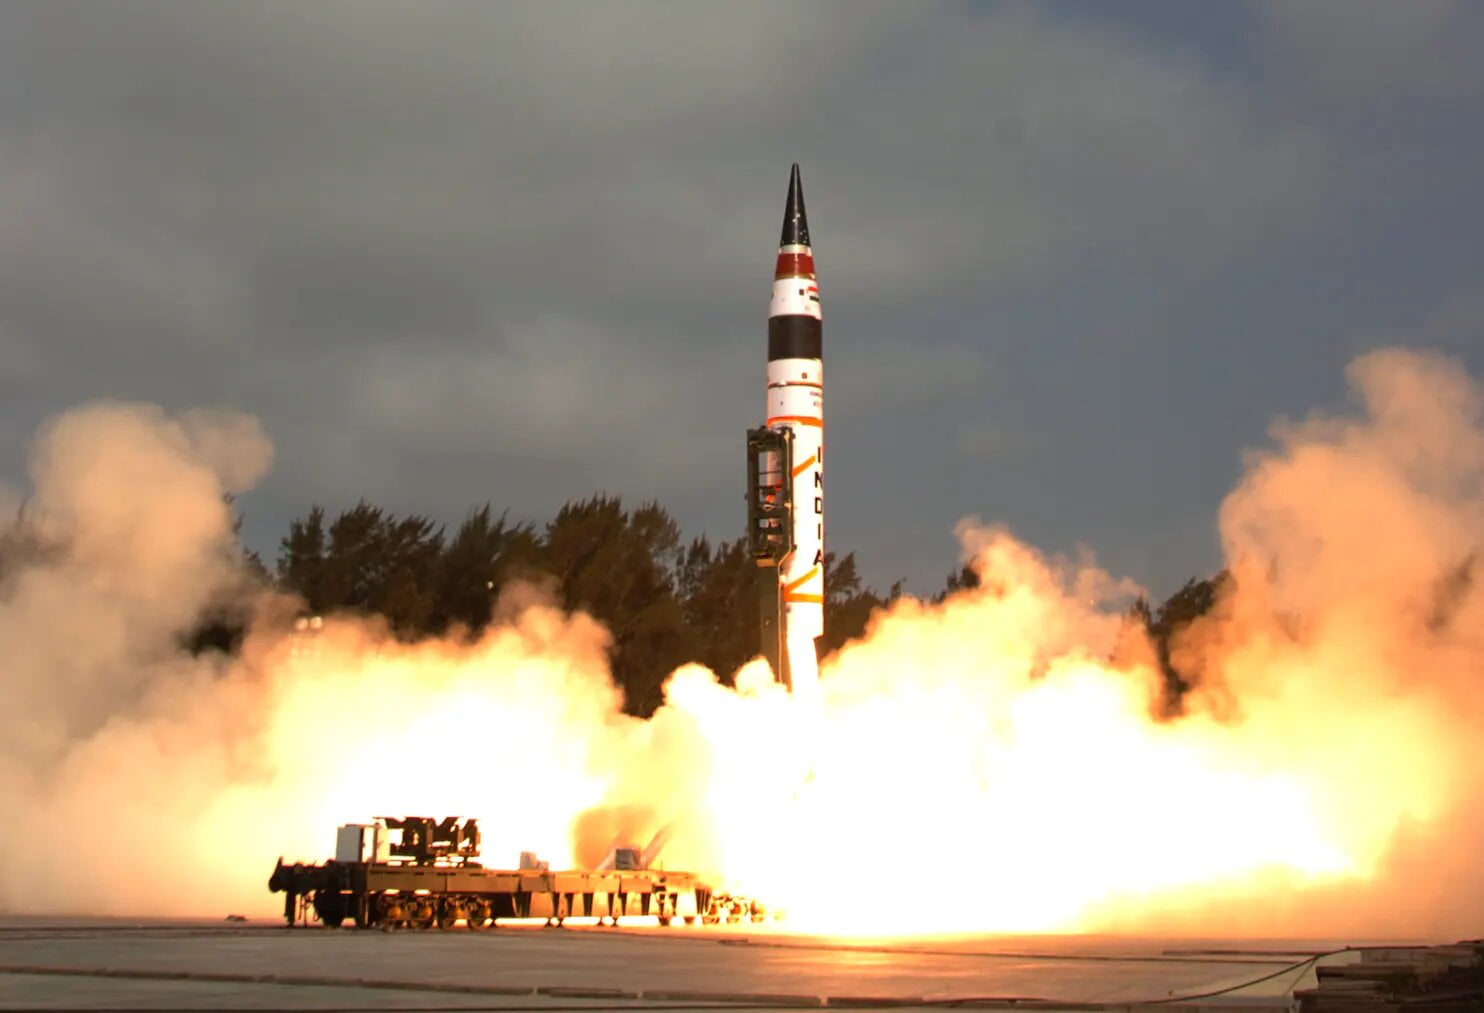 India Tests The Agni V Missile Successfully Despite Tensions With China On Their Border